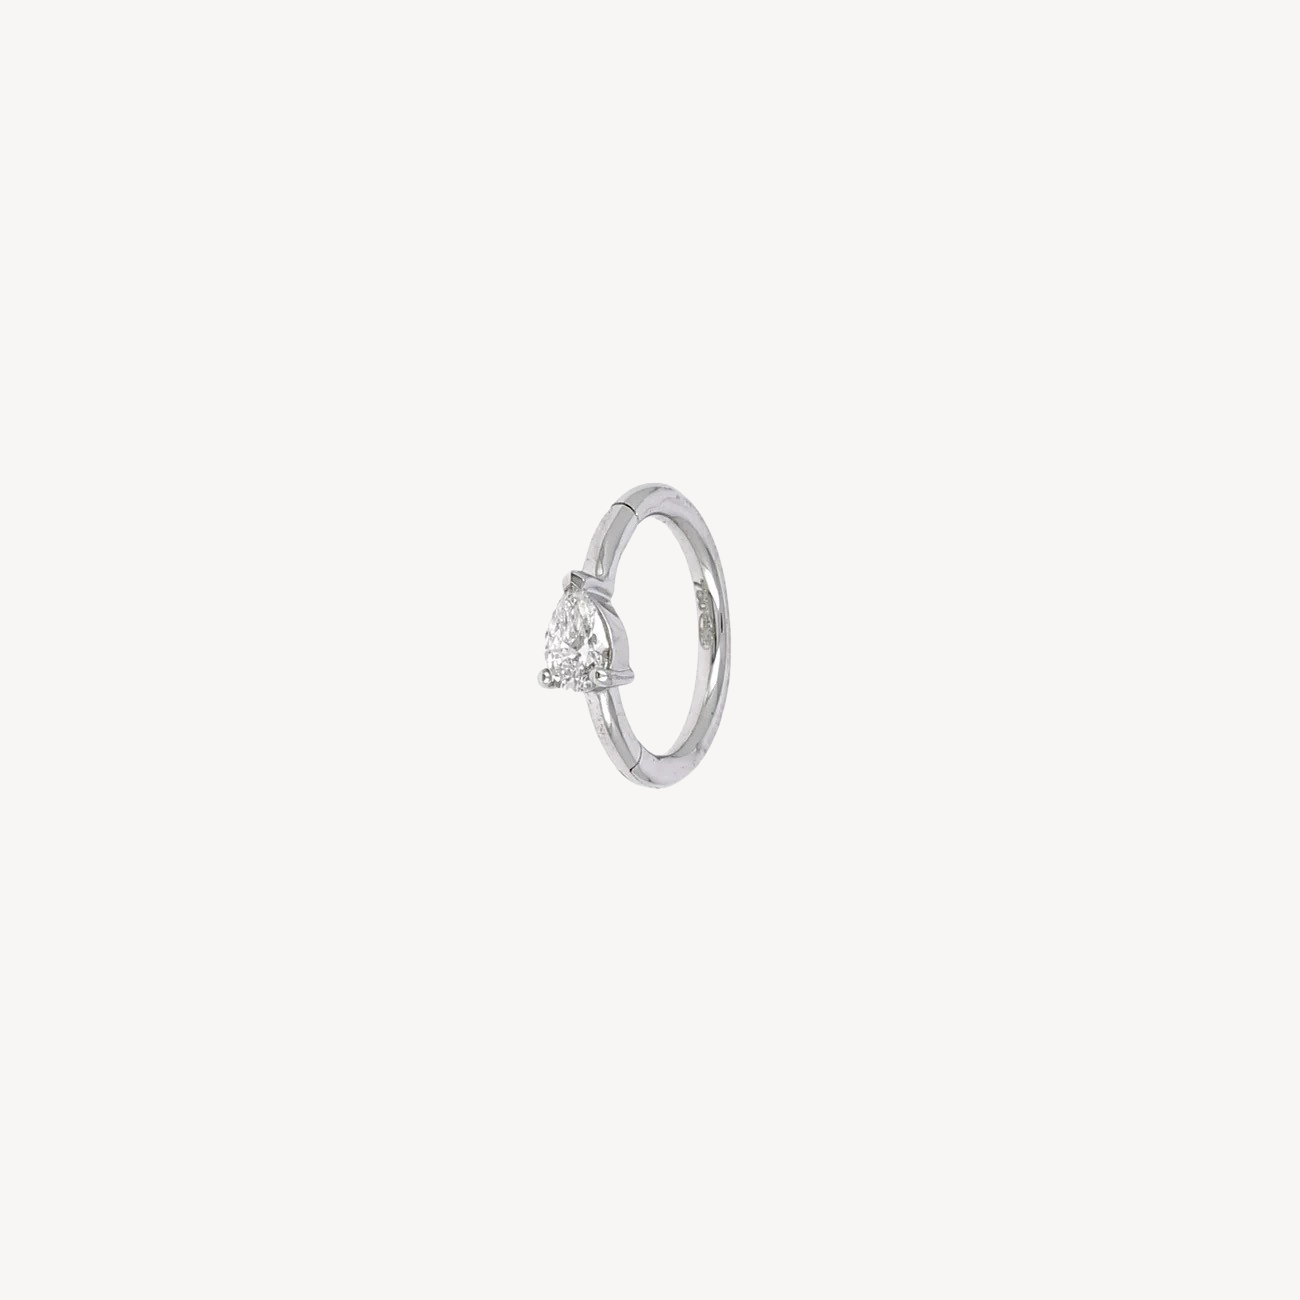 8mm White Gold Pear 3.5x2.5mm Hoop